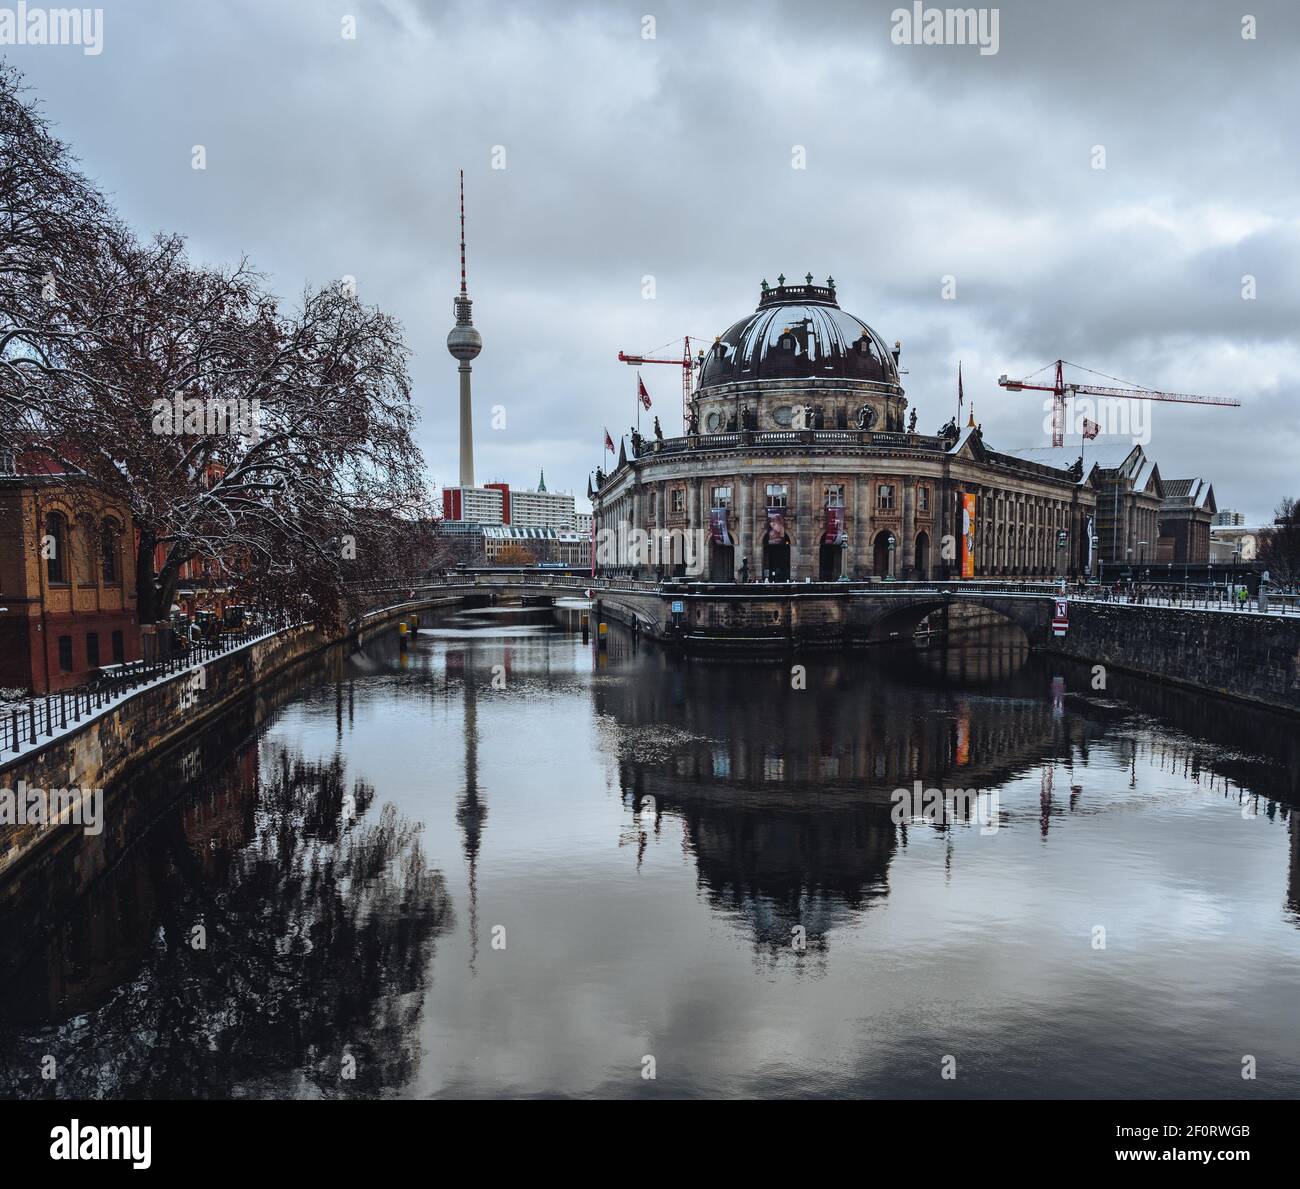 Beautiful winter view of snow covered Bode museum and UNESCO World Heritage Site Museumsinsel or Museum Island on Spree river, Berlin, Germany Stock Photo